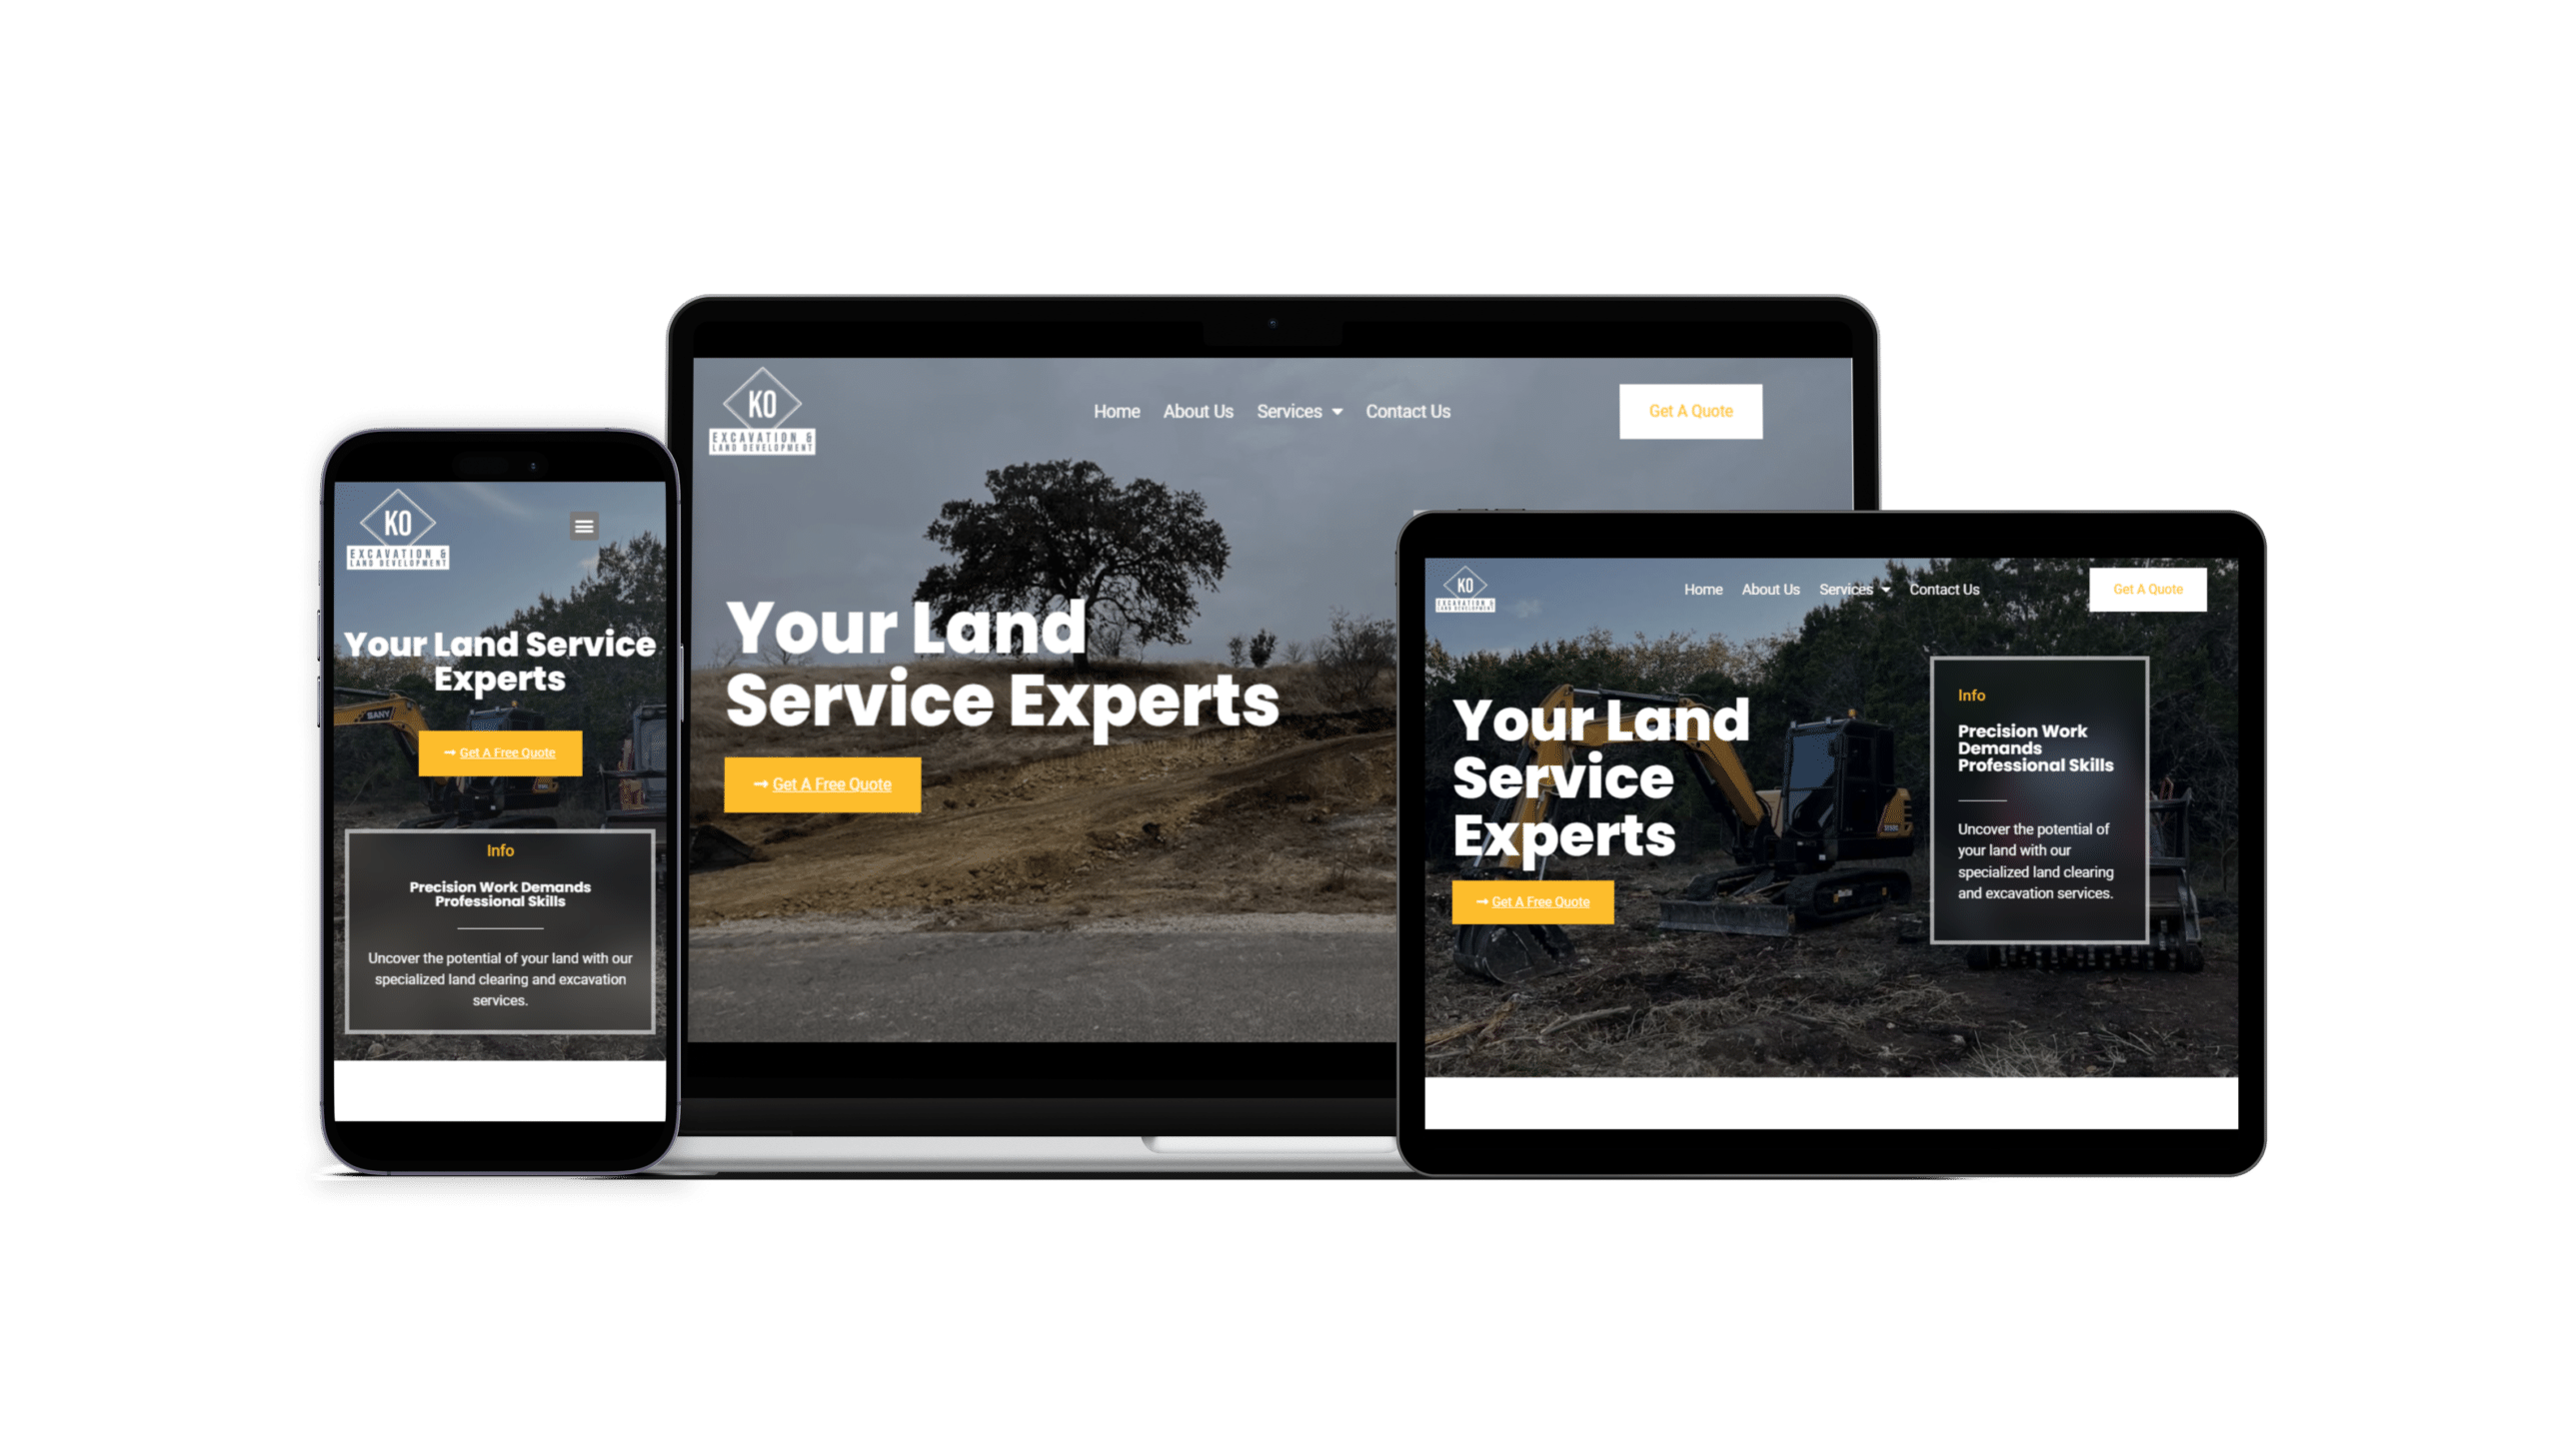 A responsive website design displayed across devices: a smartphone, laptop, and tablet, showcasing a successful land service company's homepage.